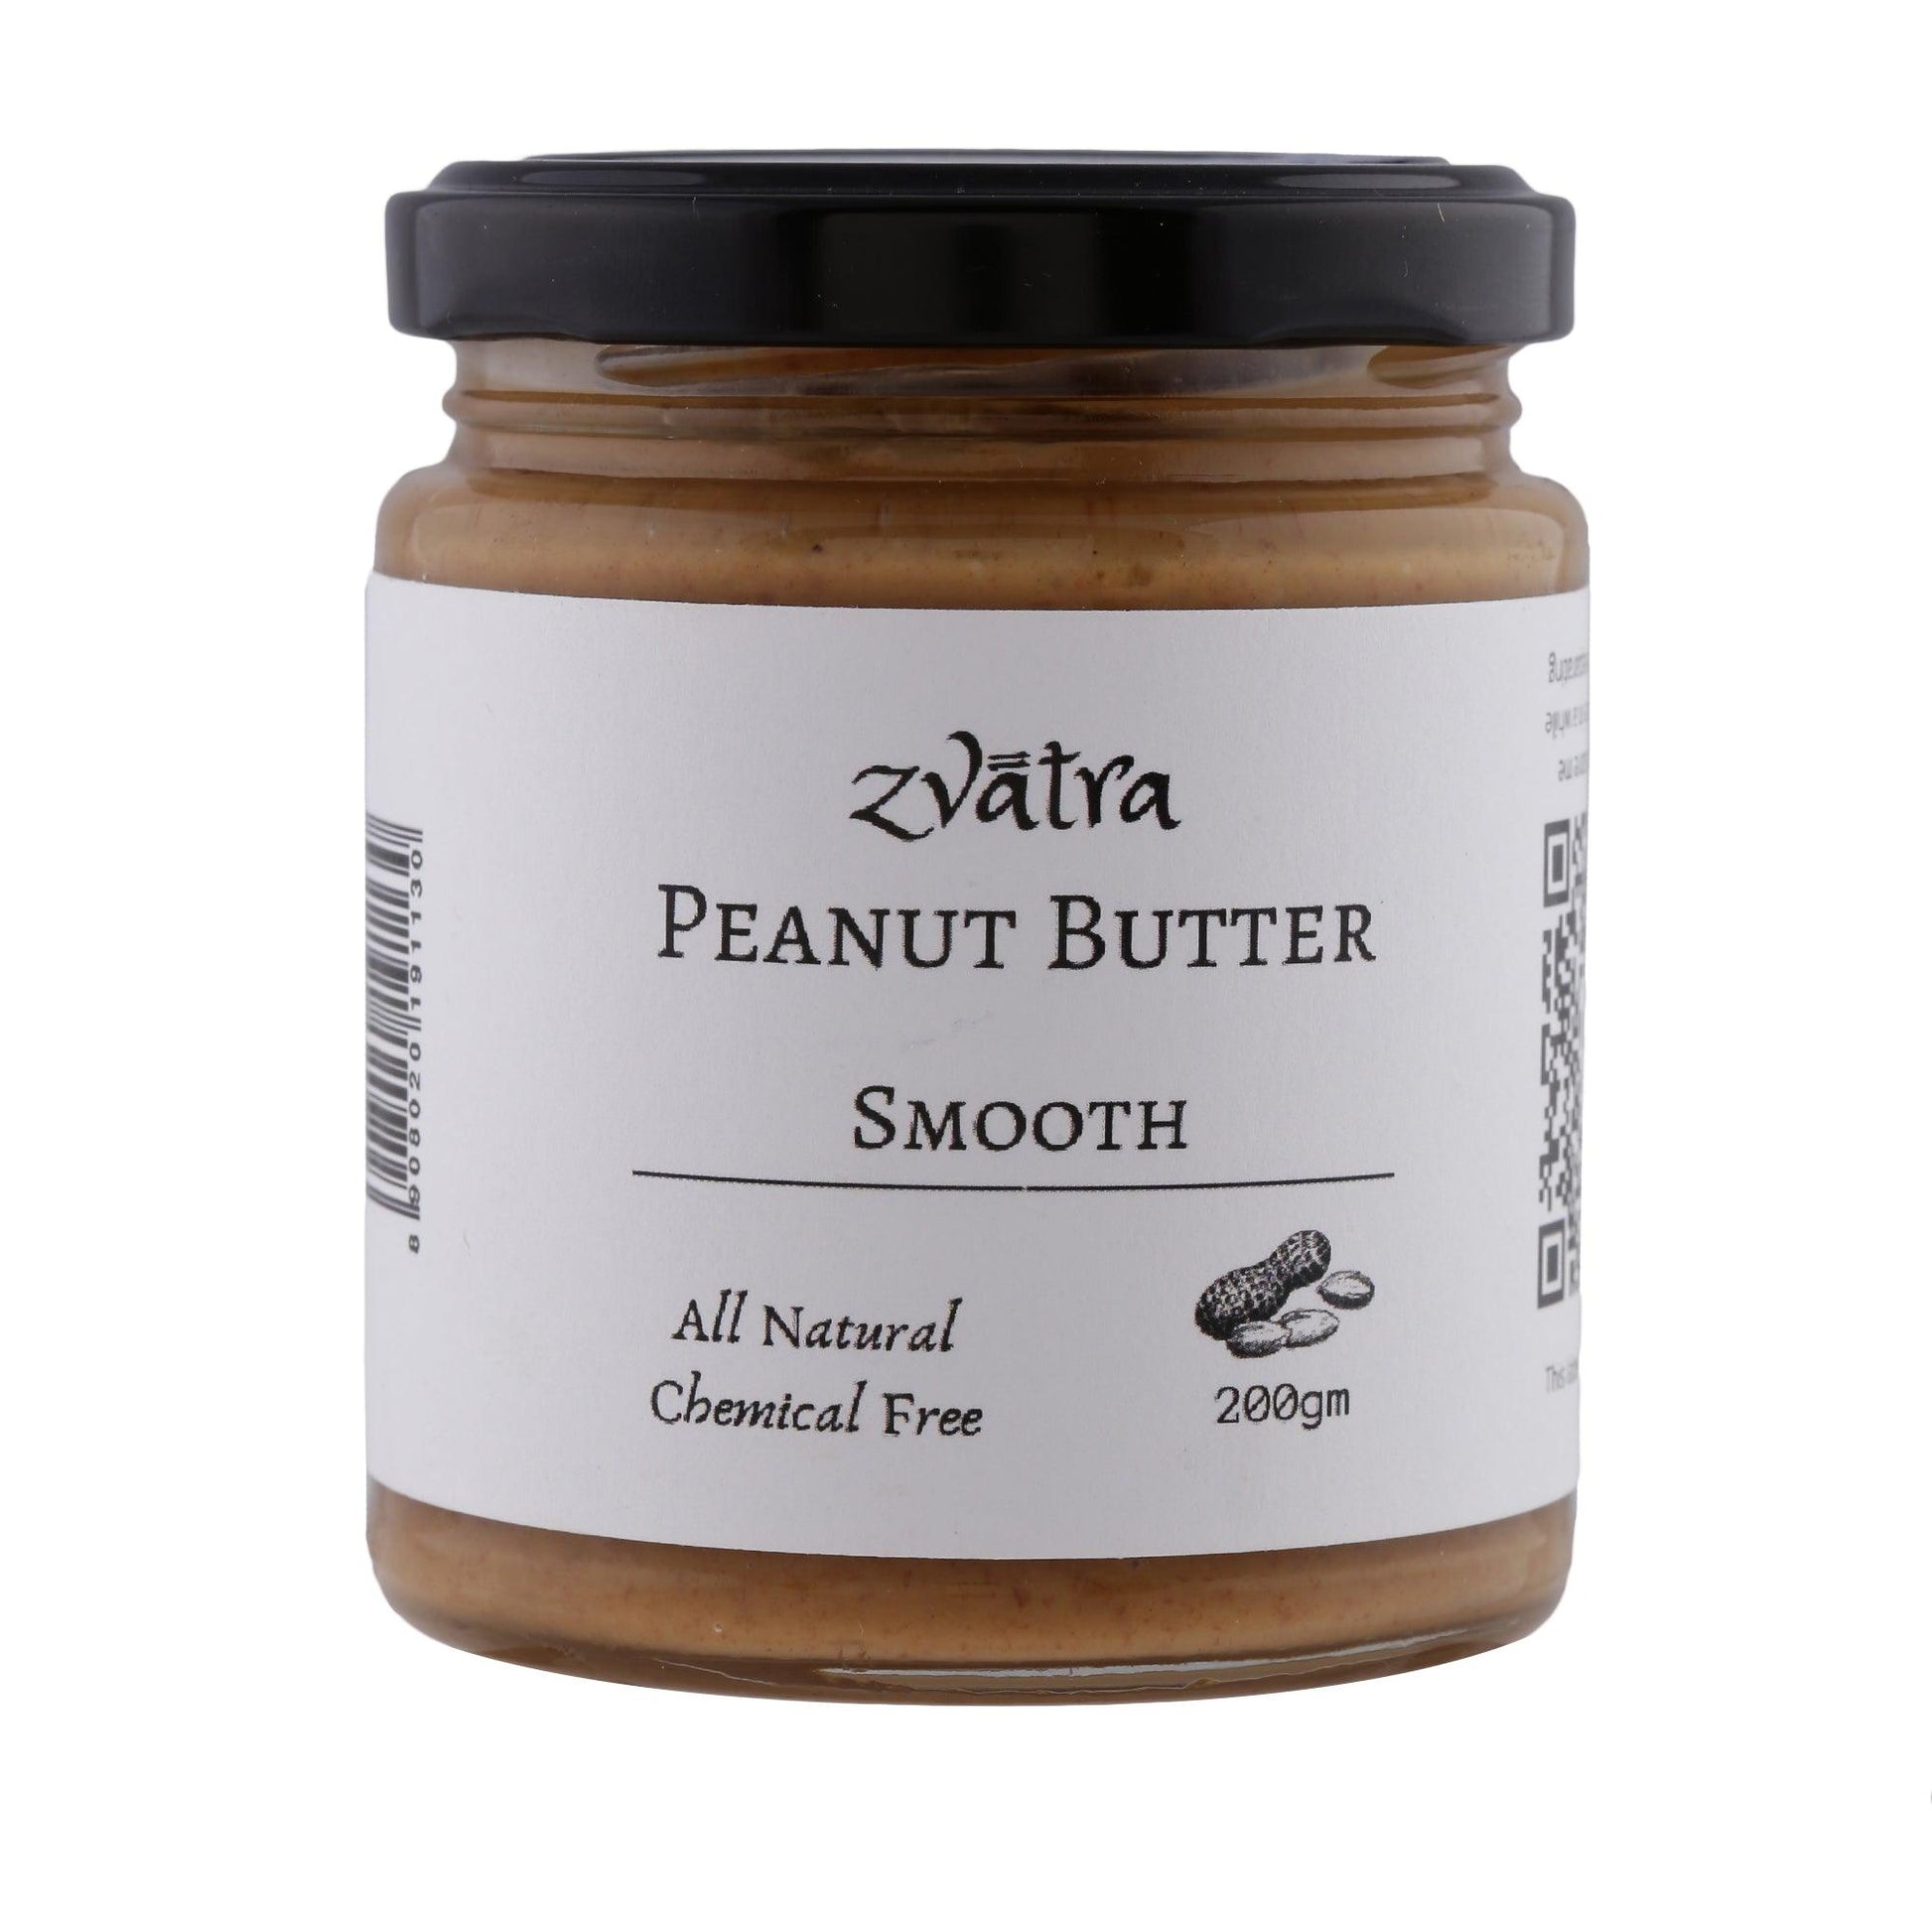 Peanut Butter - Sweetened with Jaggery - Smooth - Wildermart